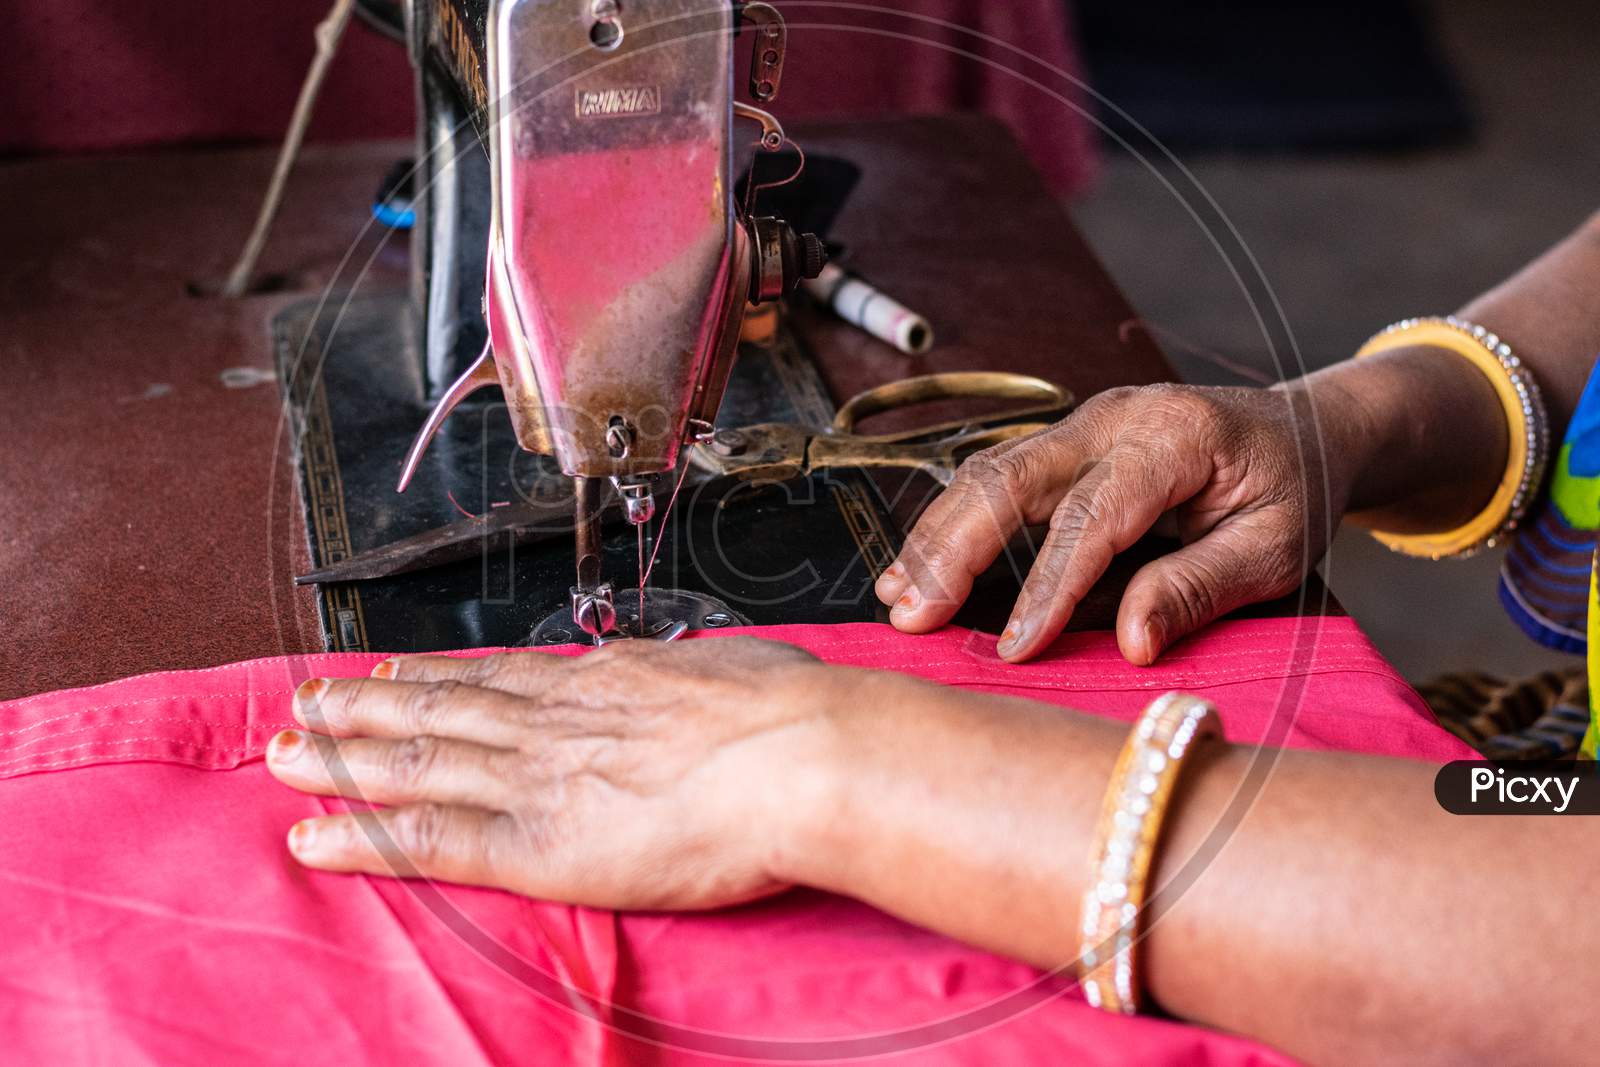 A woman sewing clothes on sewing machine at home